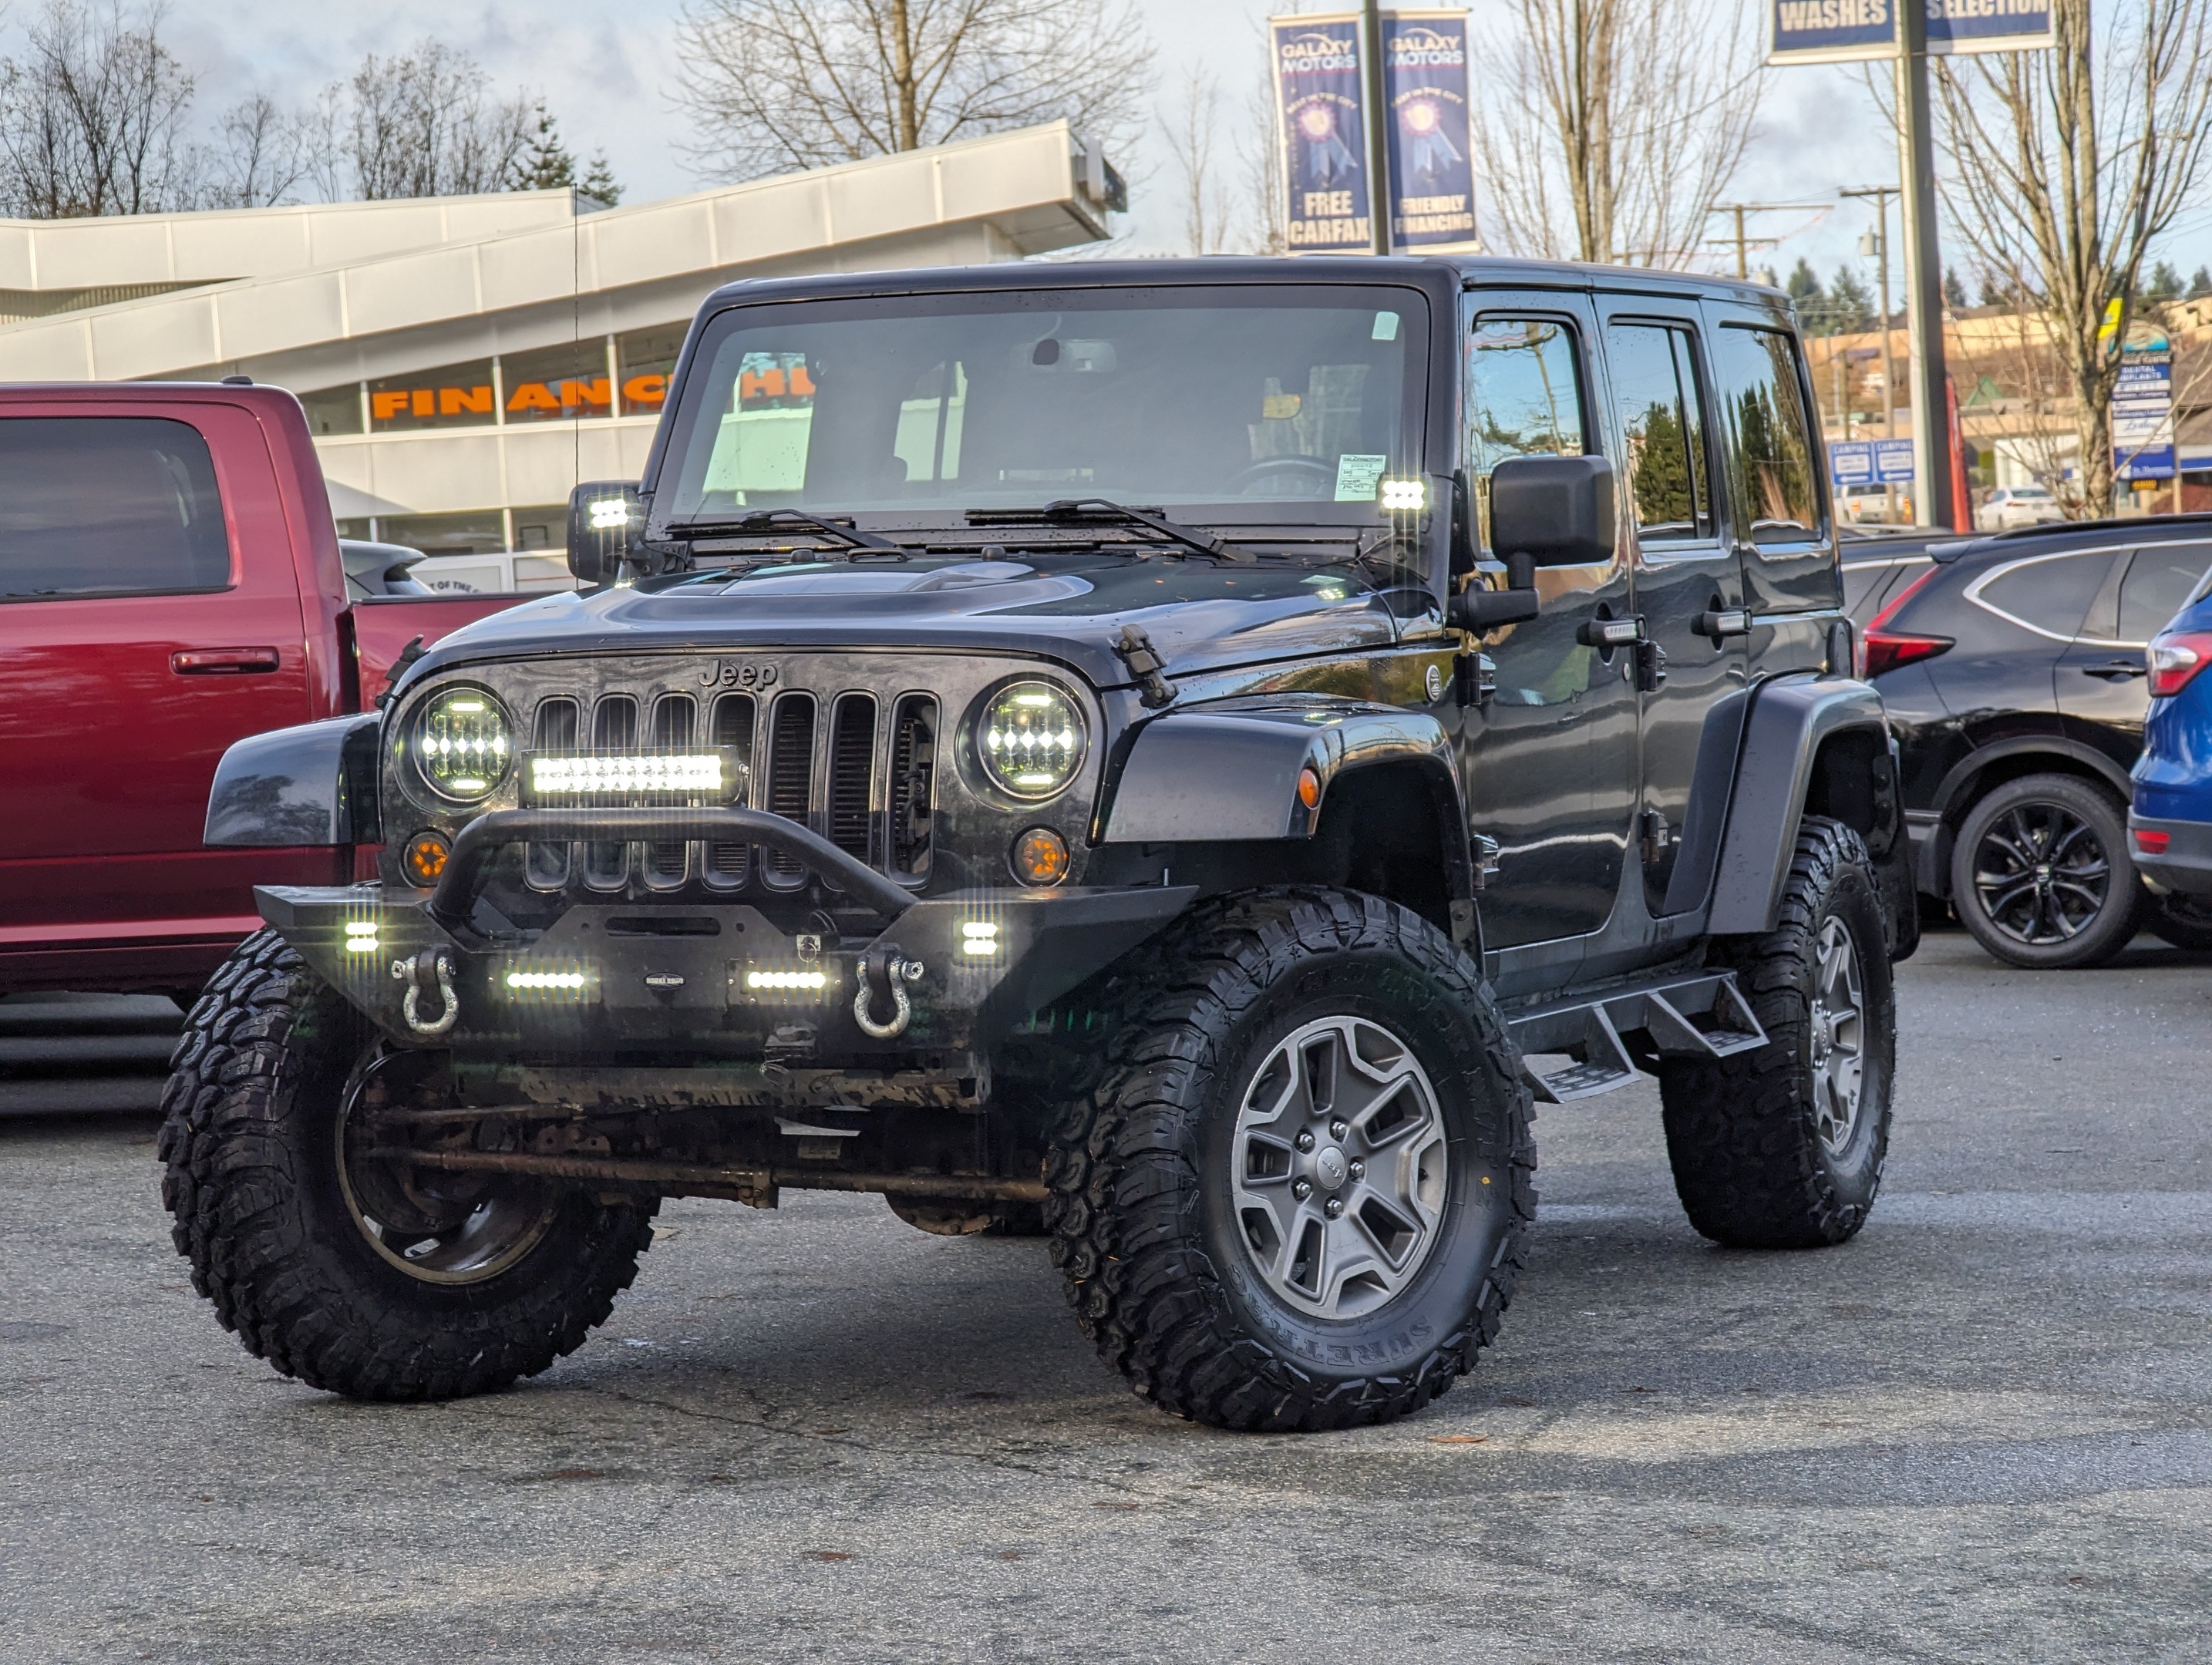 2015 Jeep Wrangler Unlimited - No Accidents, Automatic, Navigation